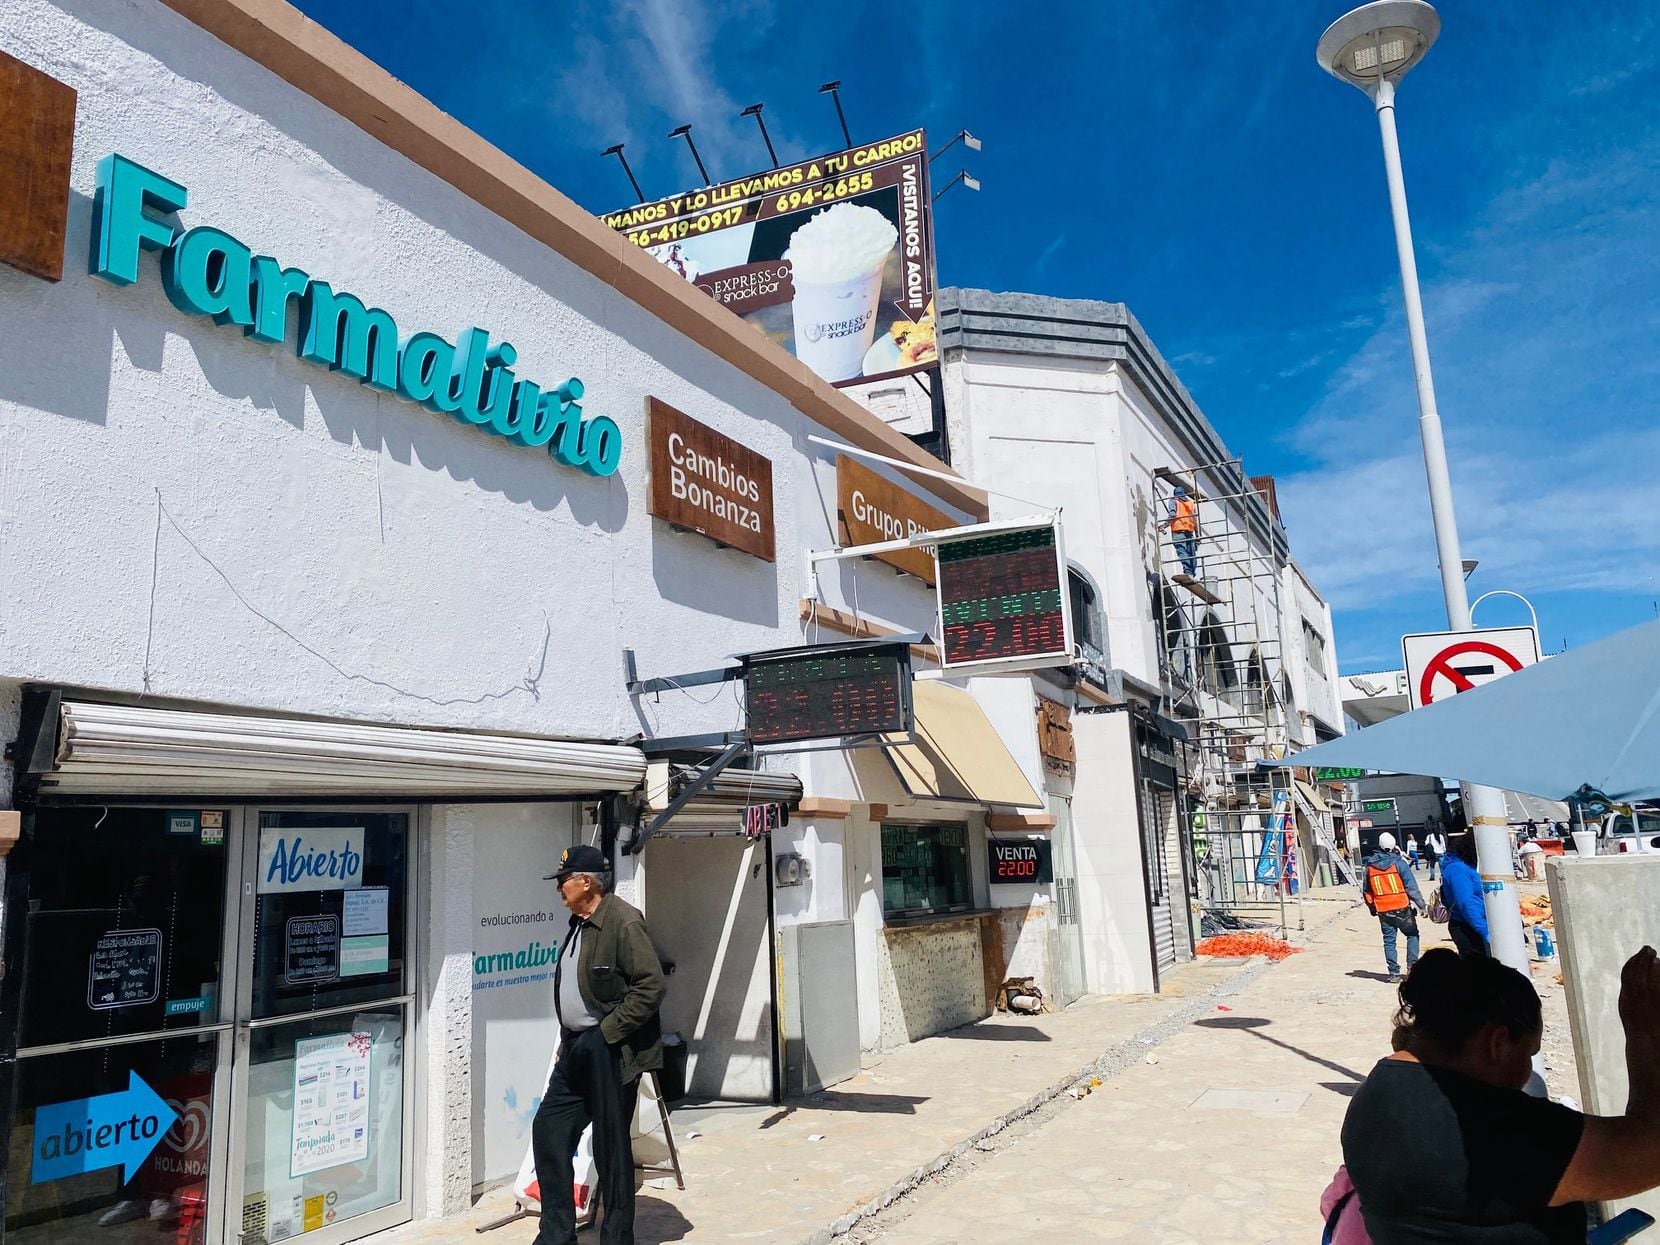 Mexican pharmacies, like this one in Ciudad Juarez just a block from the International bridge to El Paso, are common shopping venues for U.S. residents.